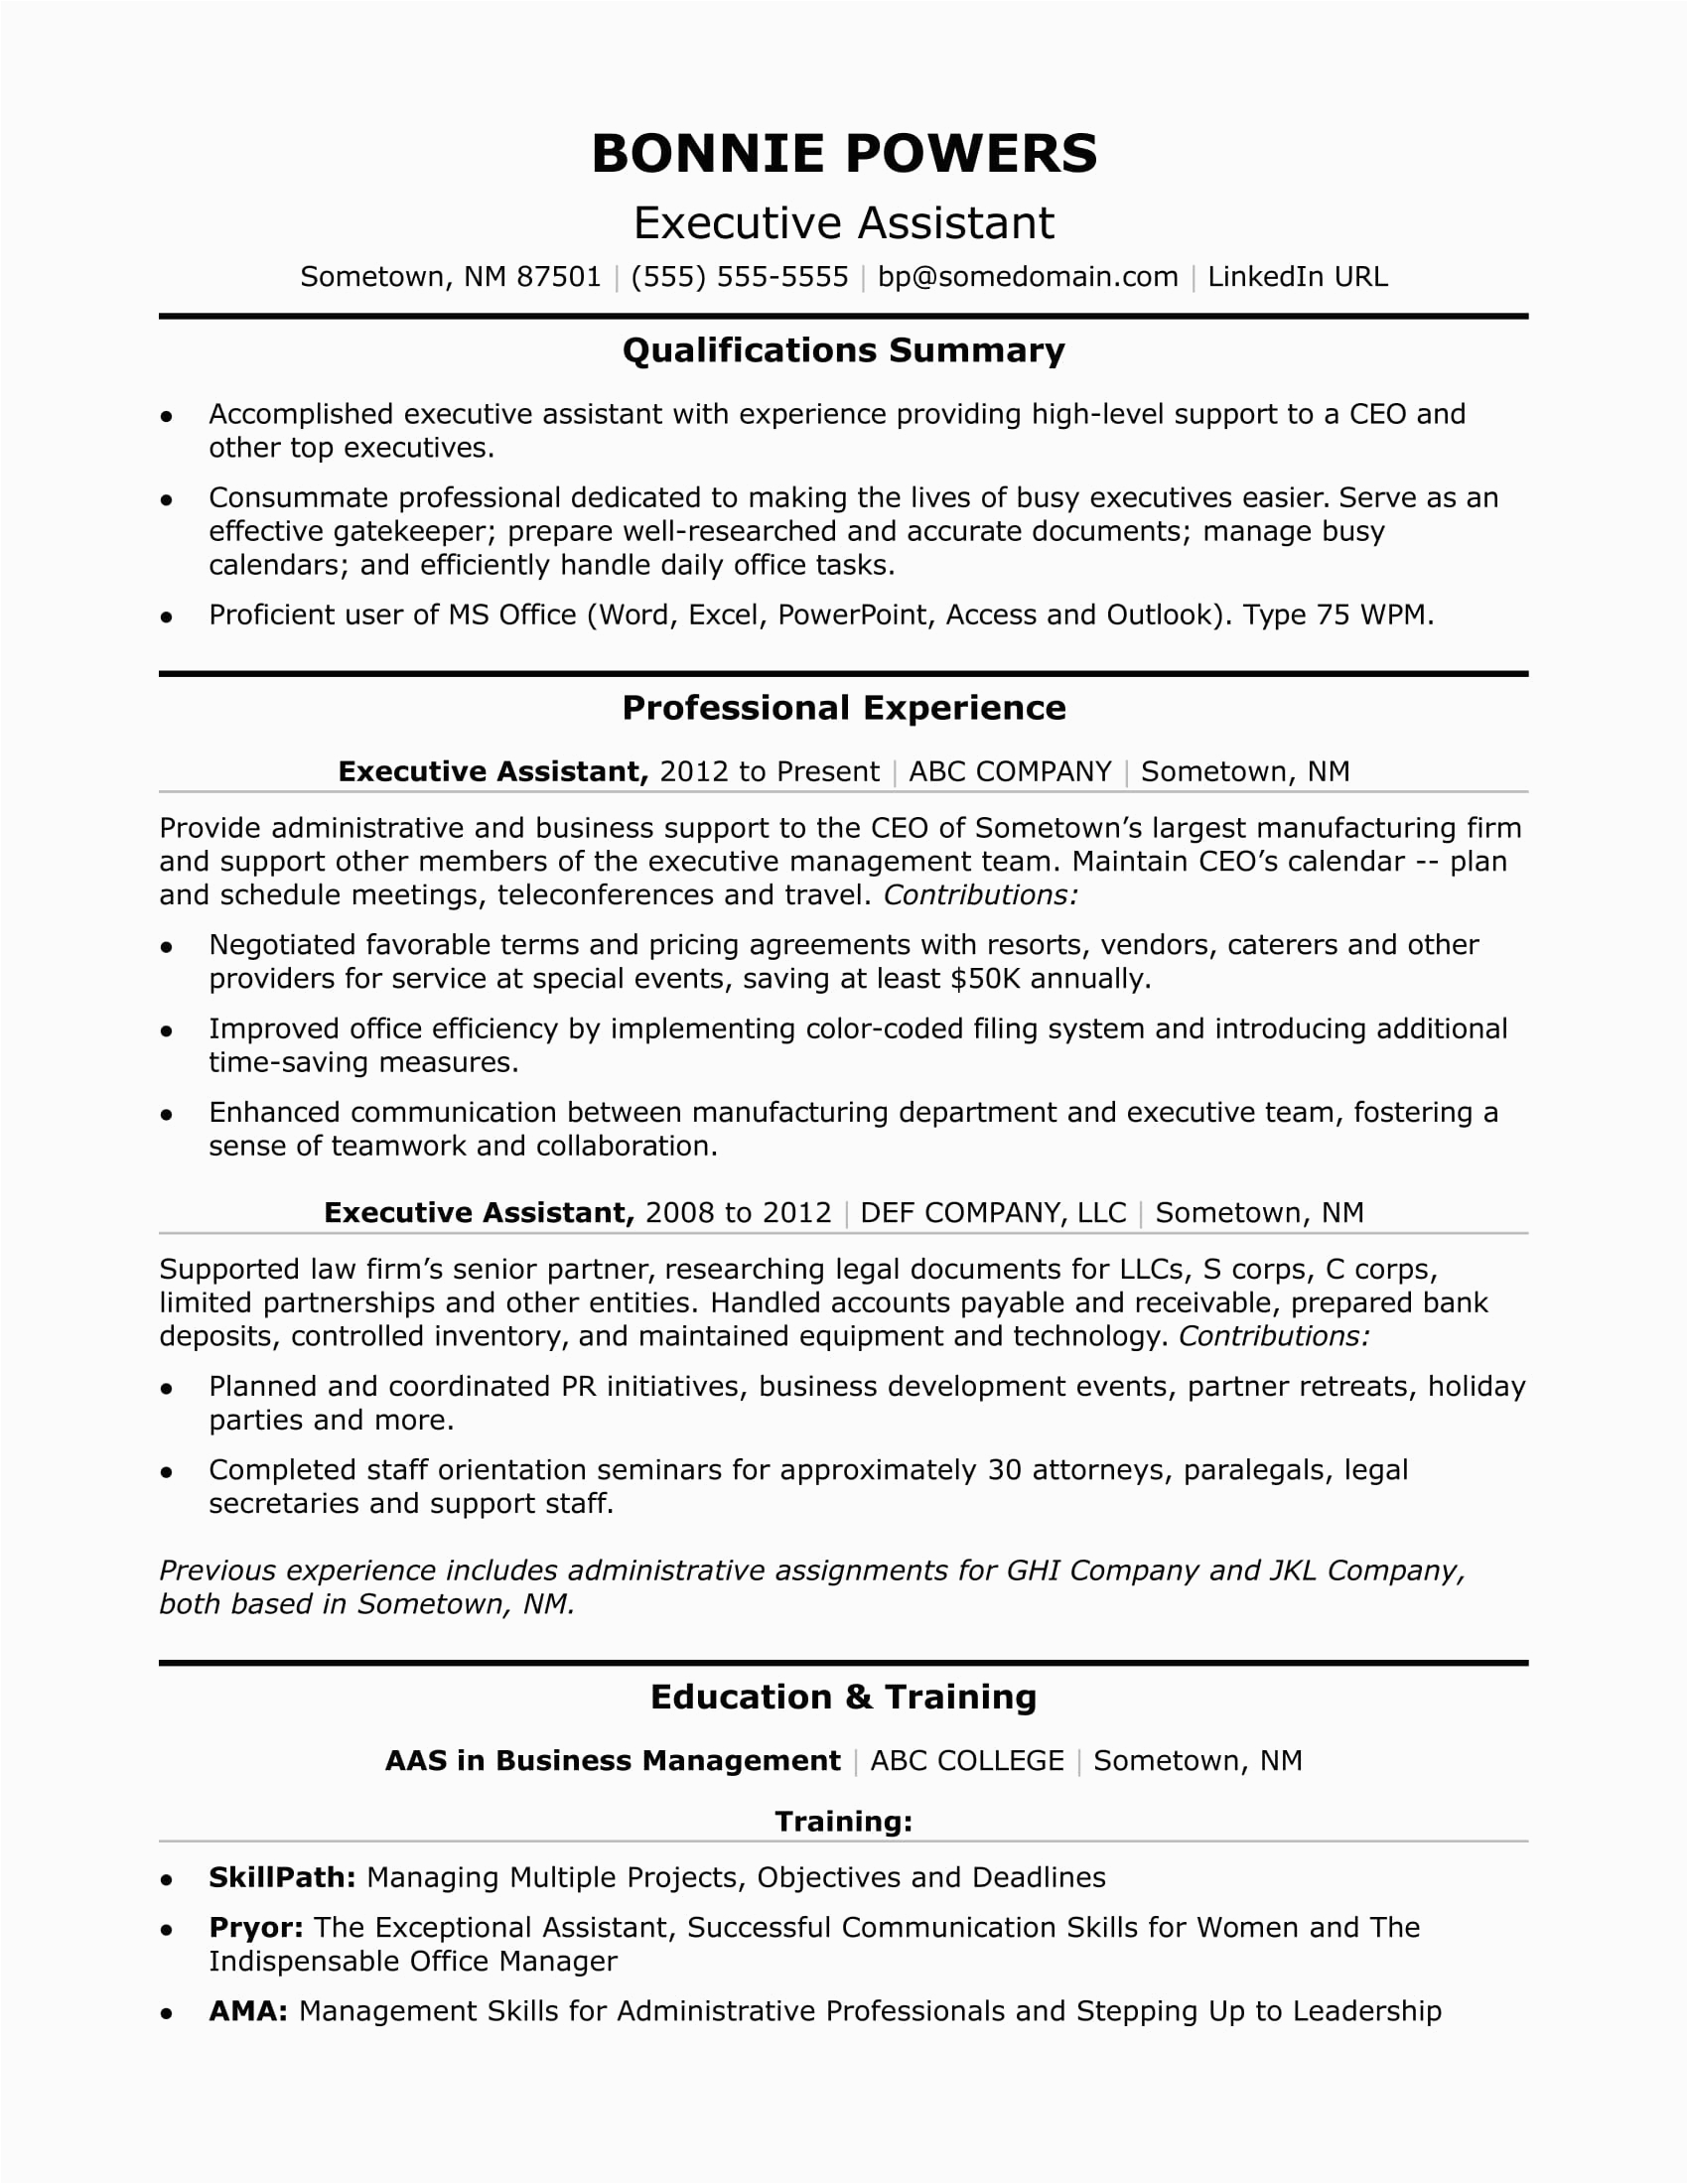 Resume Profile Samples for Admin assistant Executive Administrative assistant Resume Sample